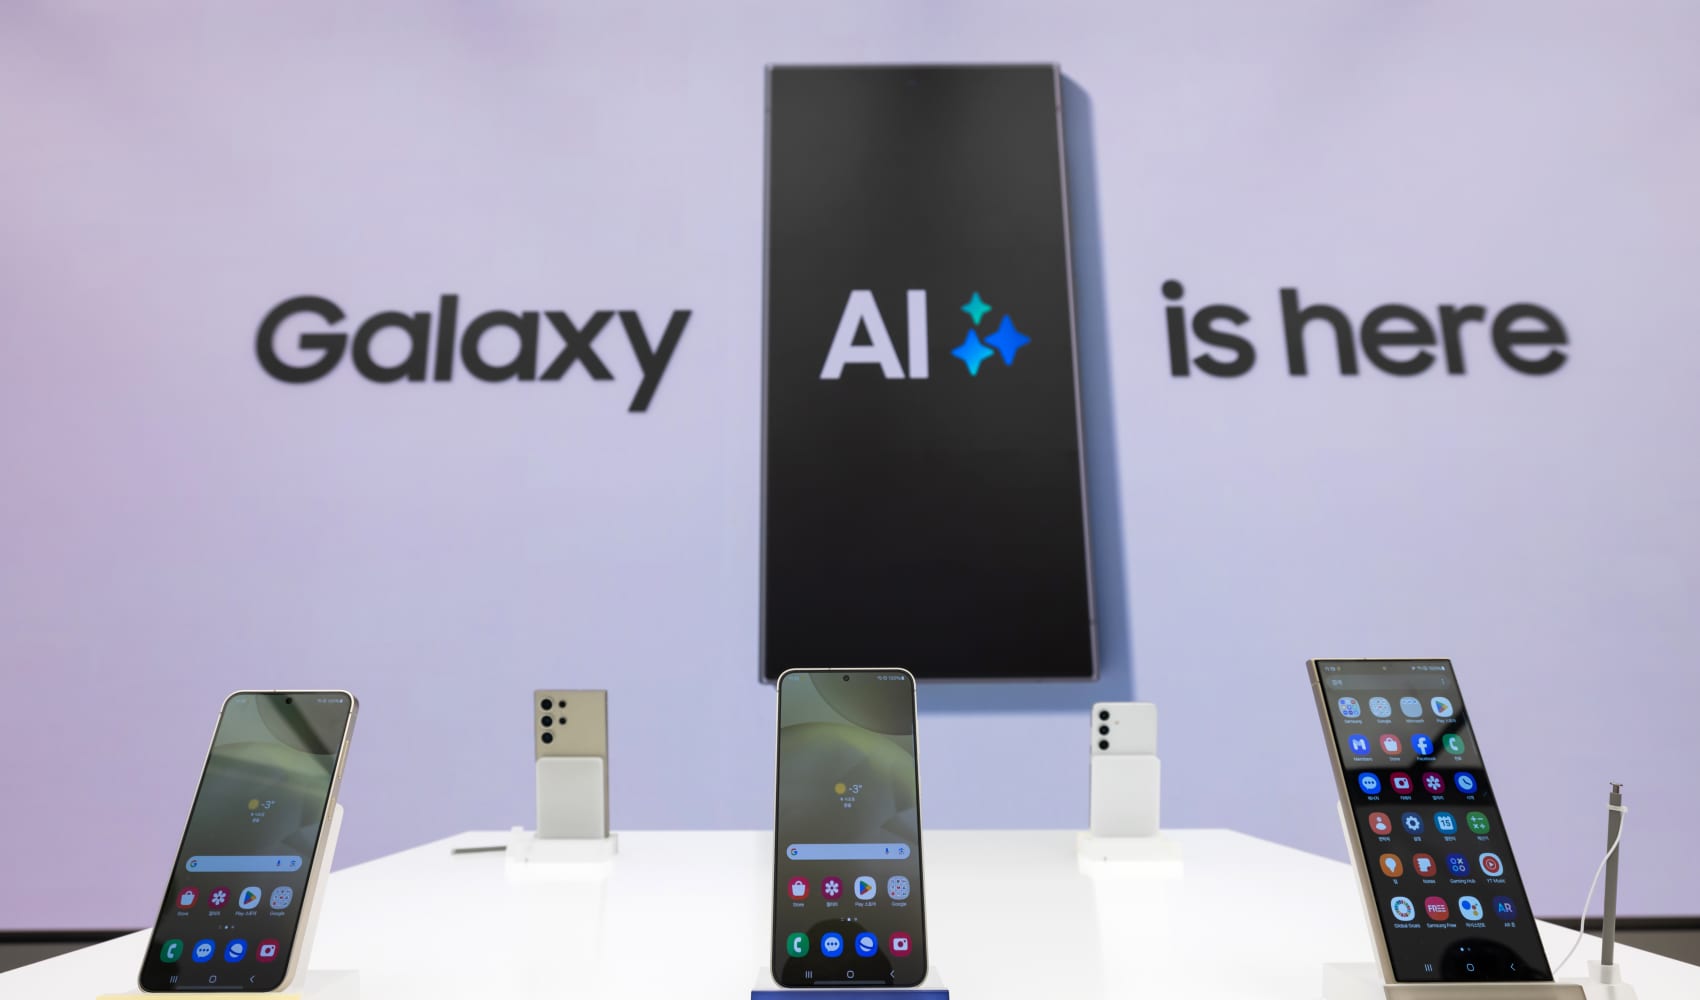 Smartphone giants like Samsung are going to talk up ‘AI phones' this
year — here's what that means